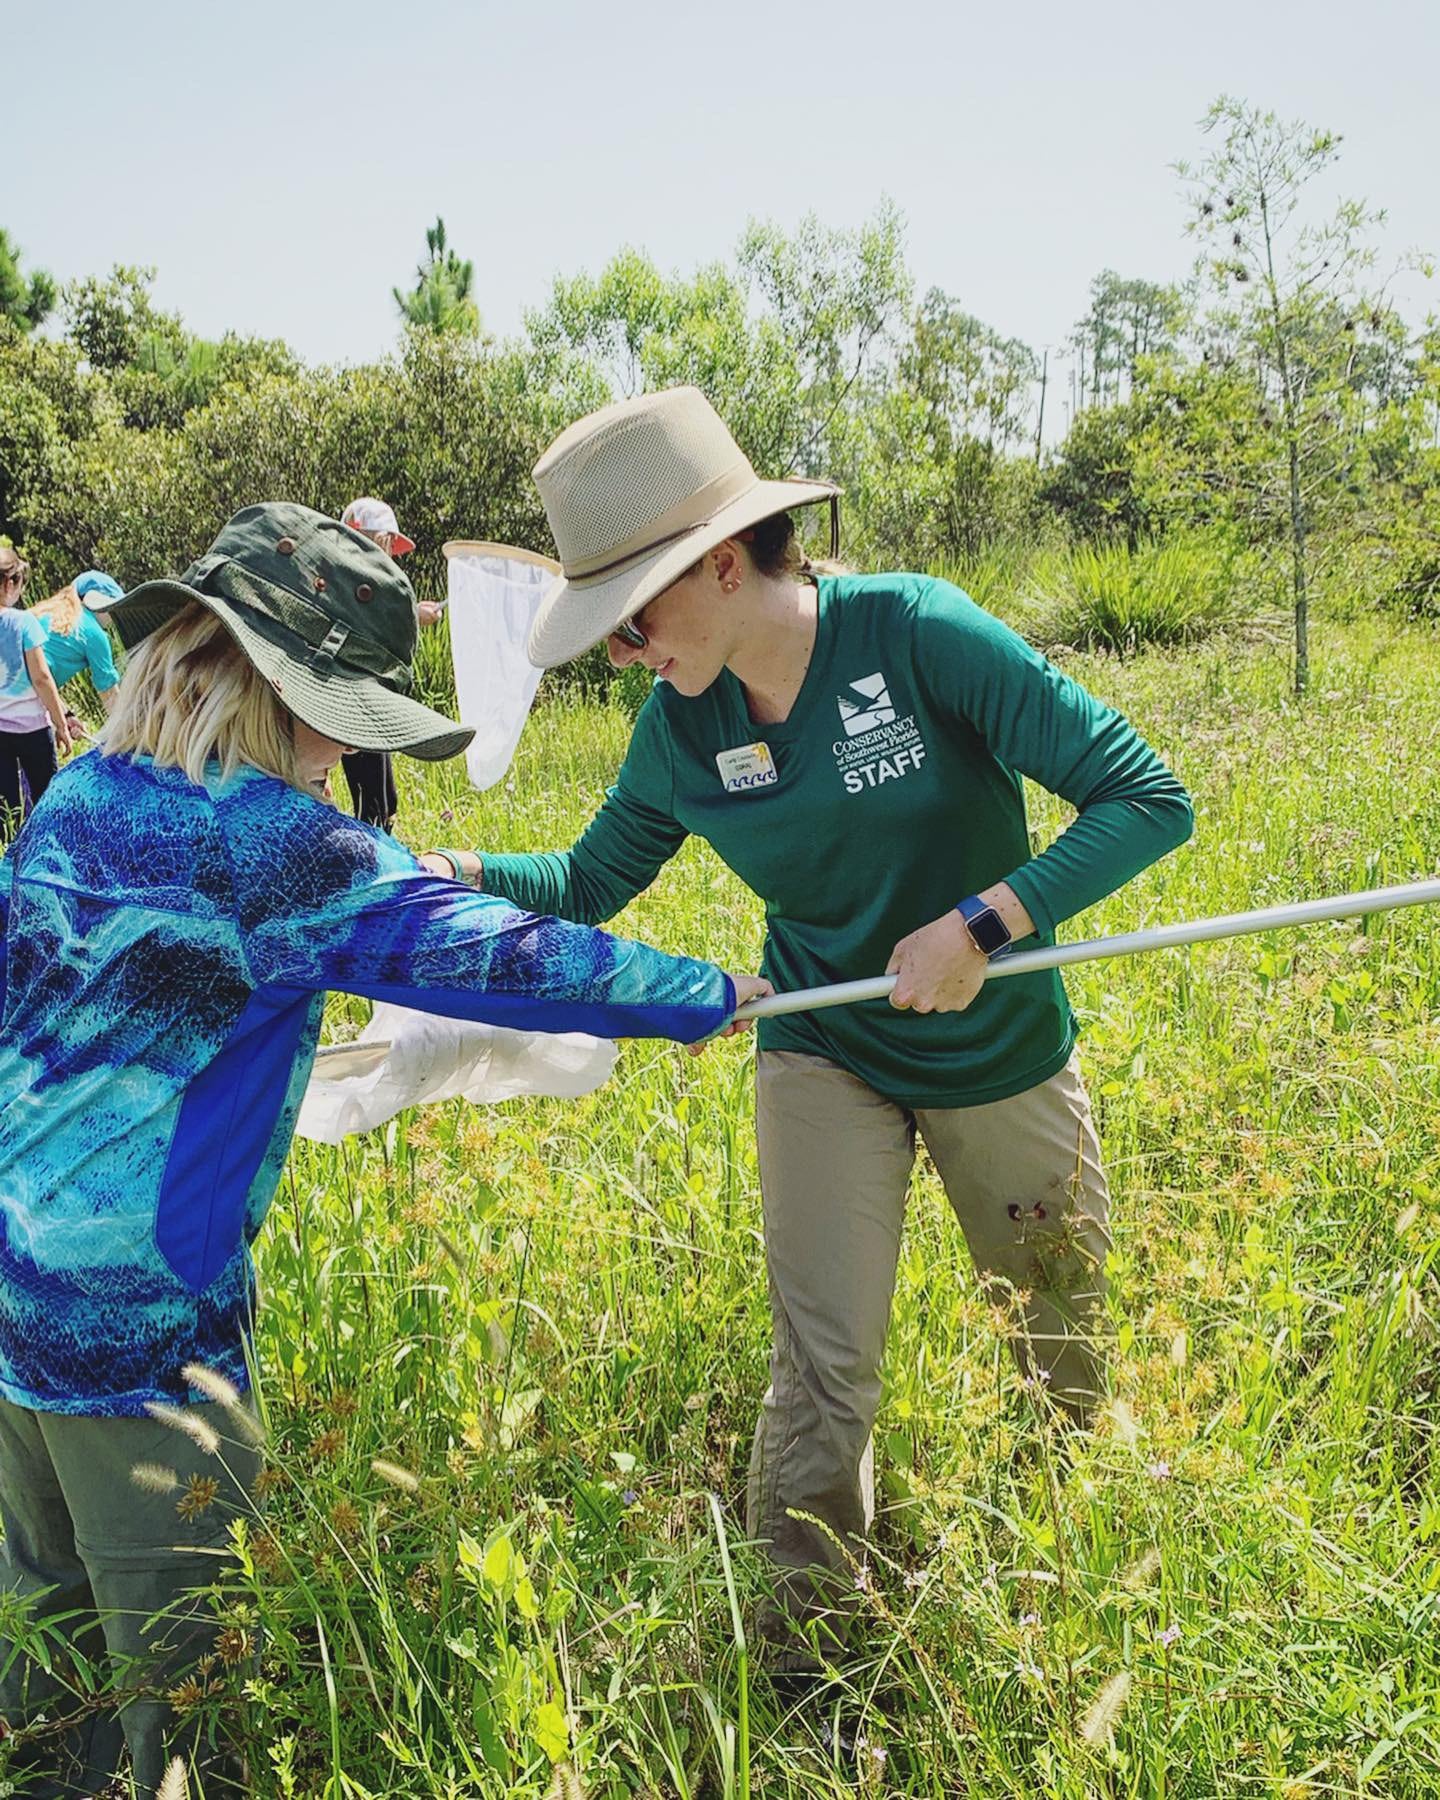 Conservancy of Southwest Florida education staff member checking a butterfly net with a student